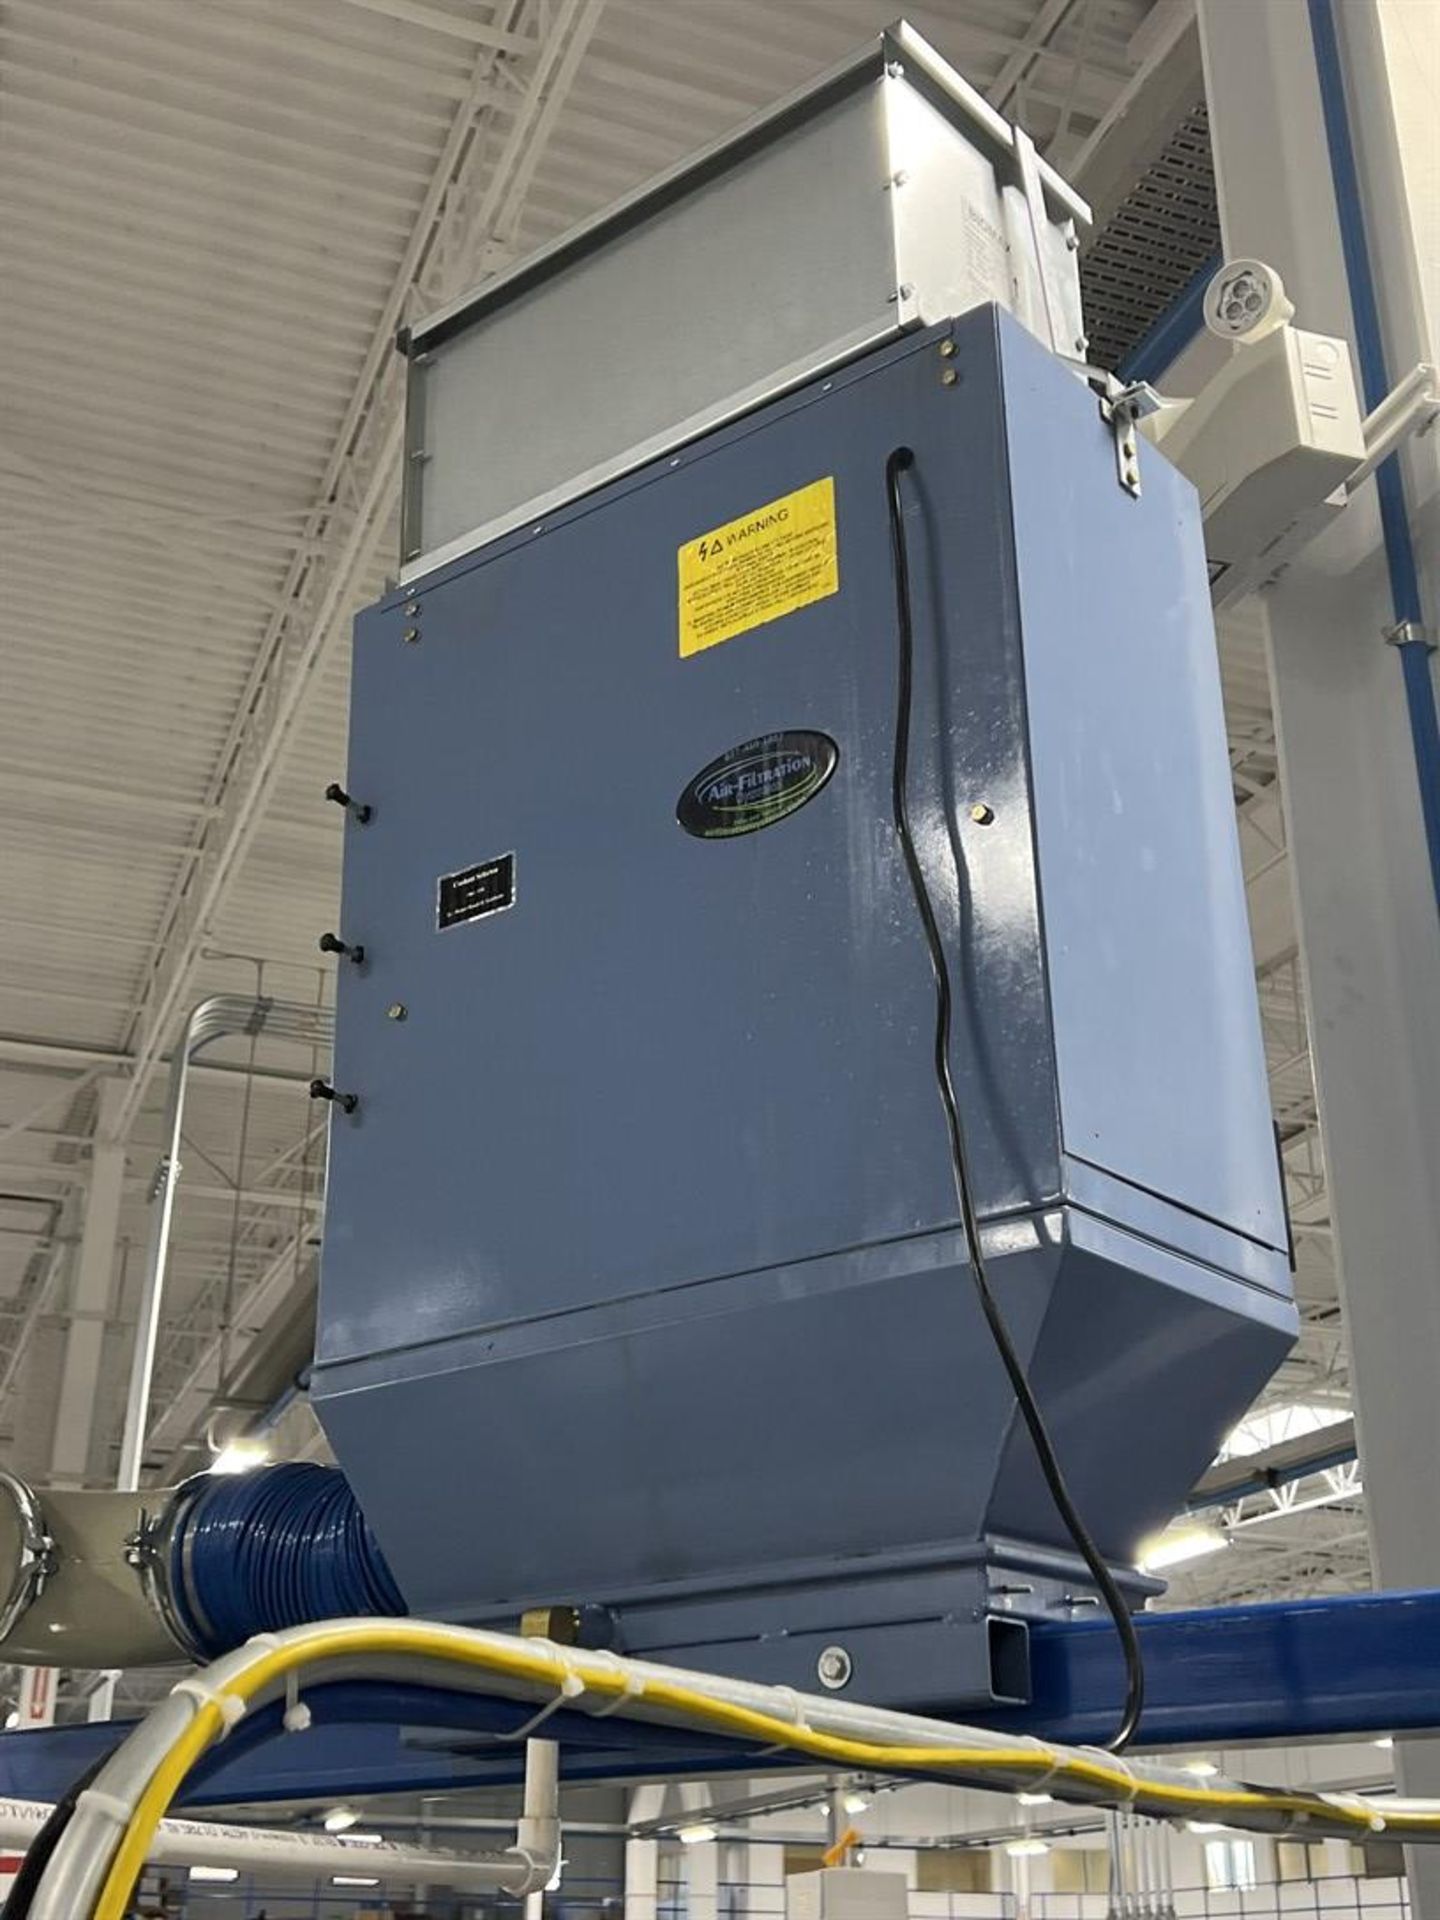 AIR QUALITY ENGINEERING Mistbuster 850 Air Cleaning System - Image 4 of 4